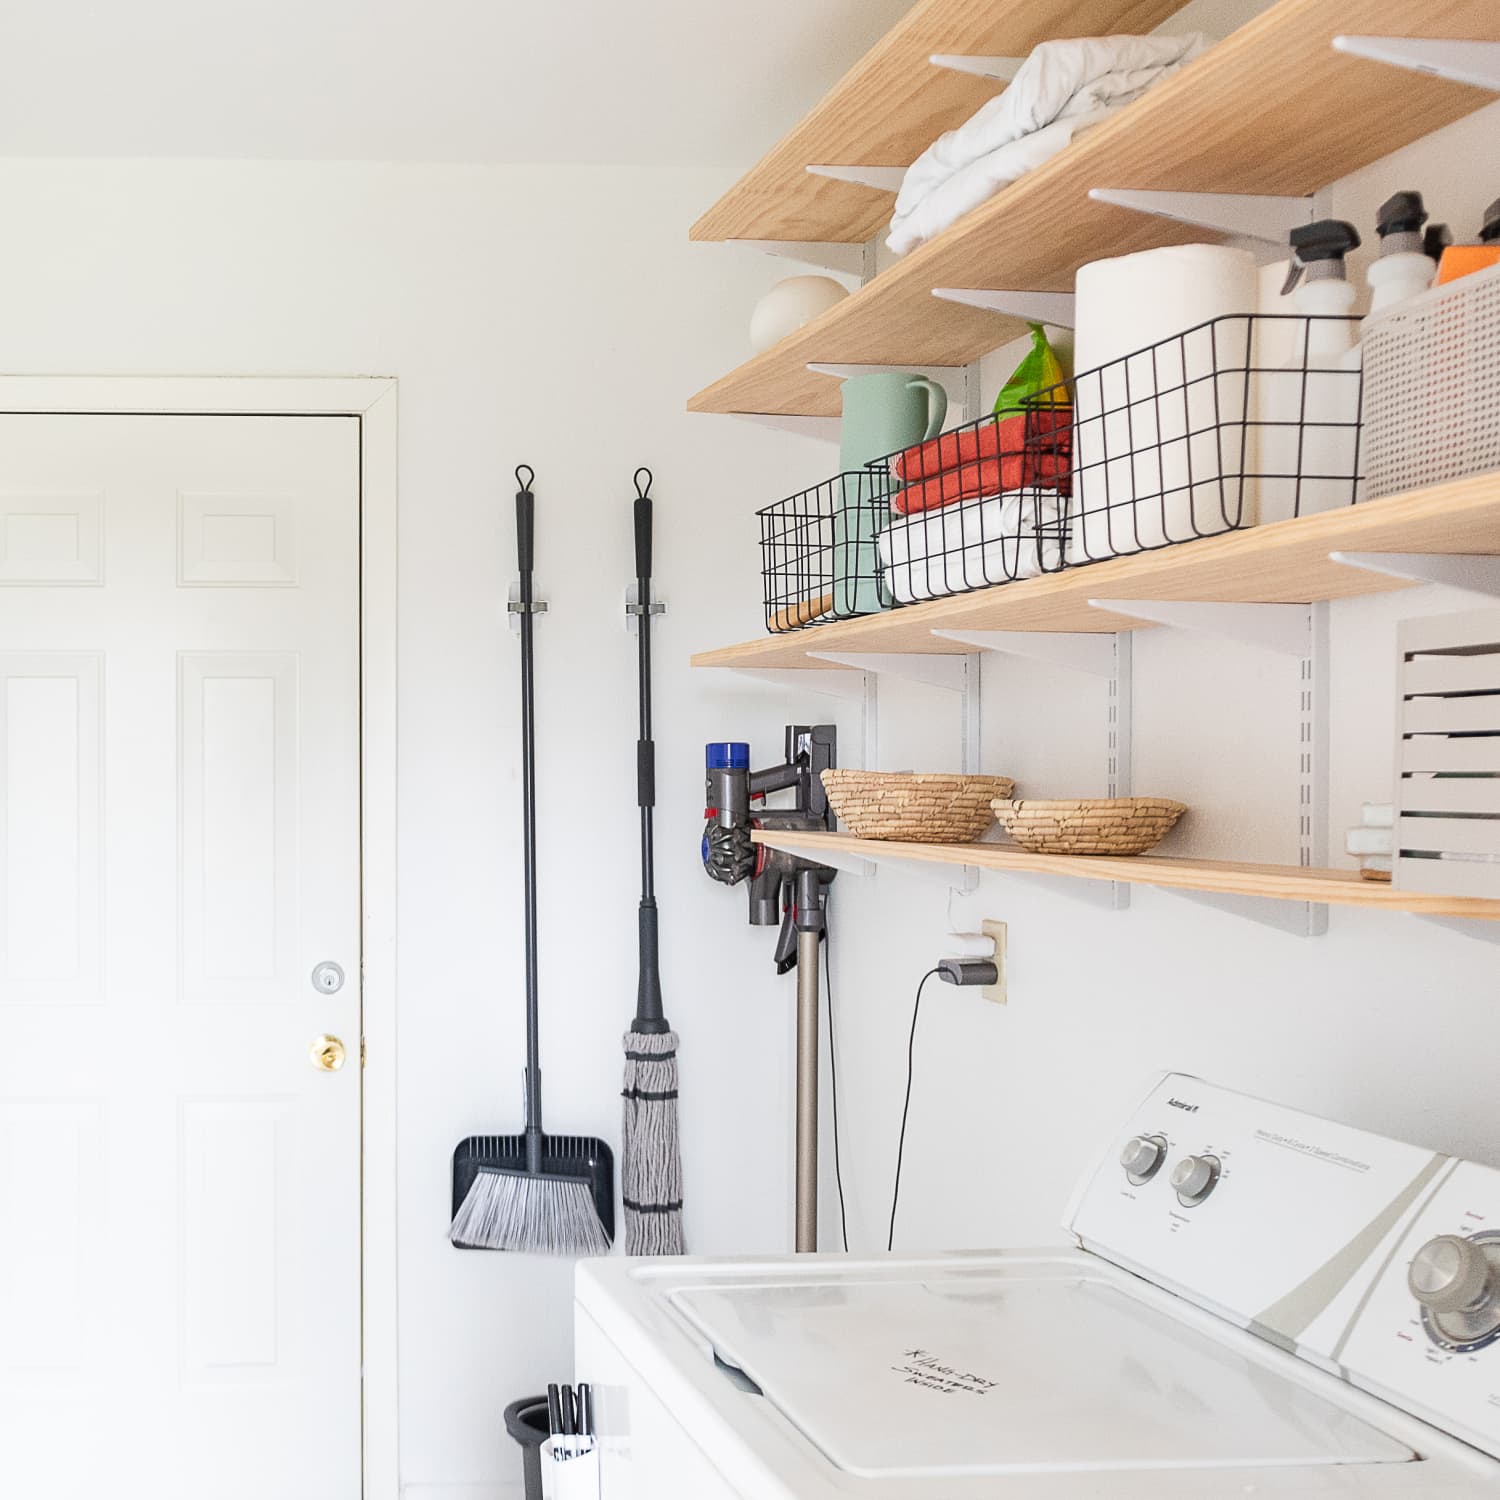 5 Things You Need to Know to Run Your Own Apartment Laundry Room